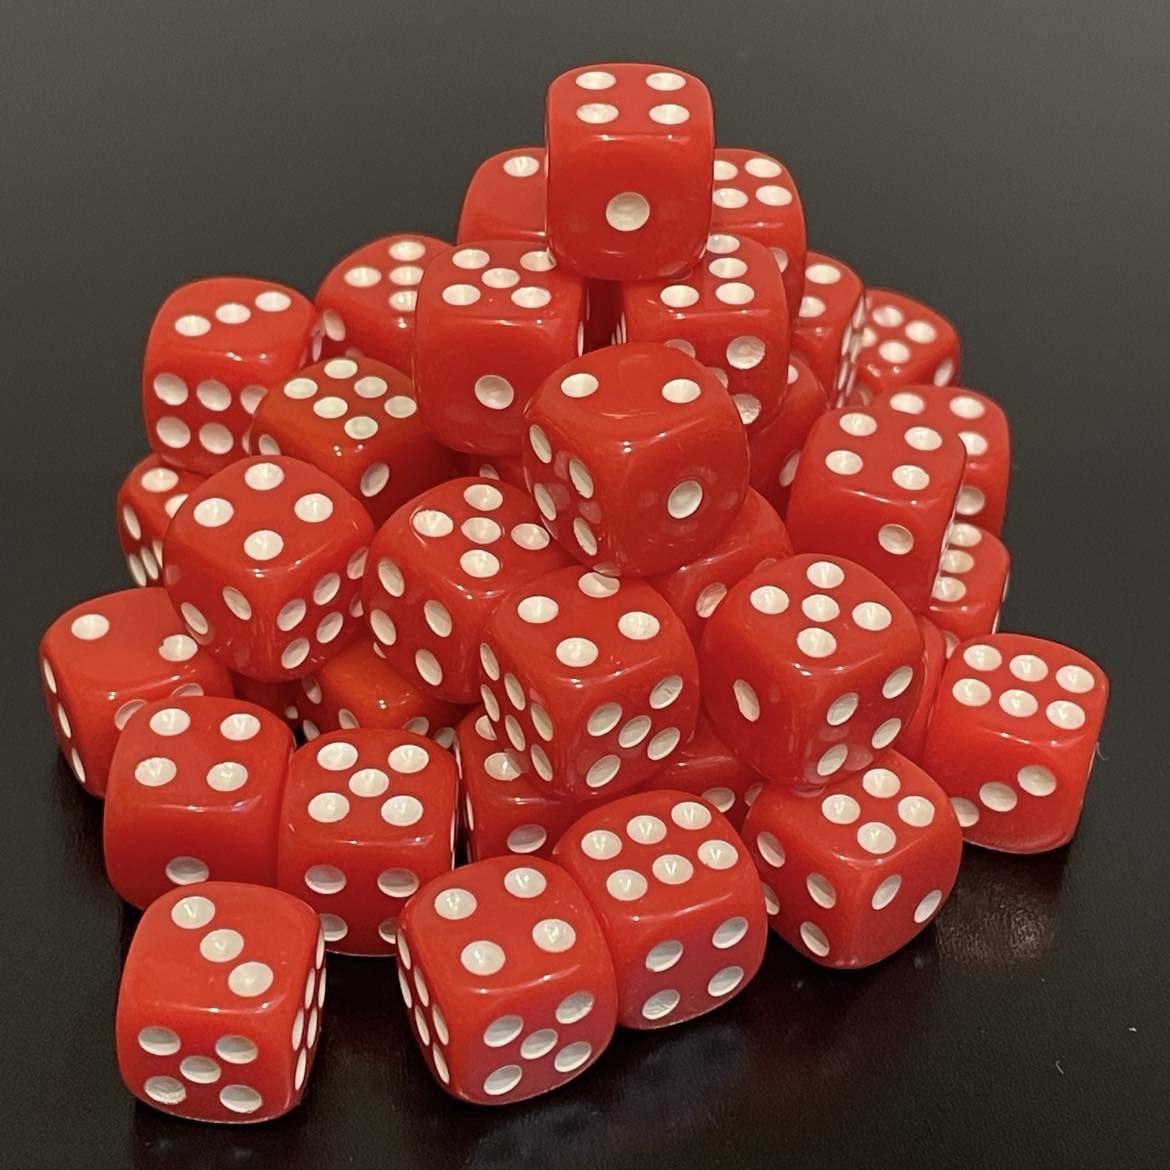 12mm Dice Red (48)